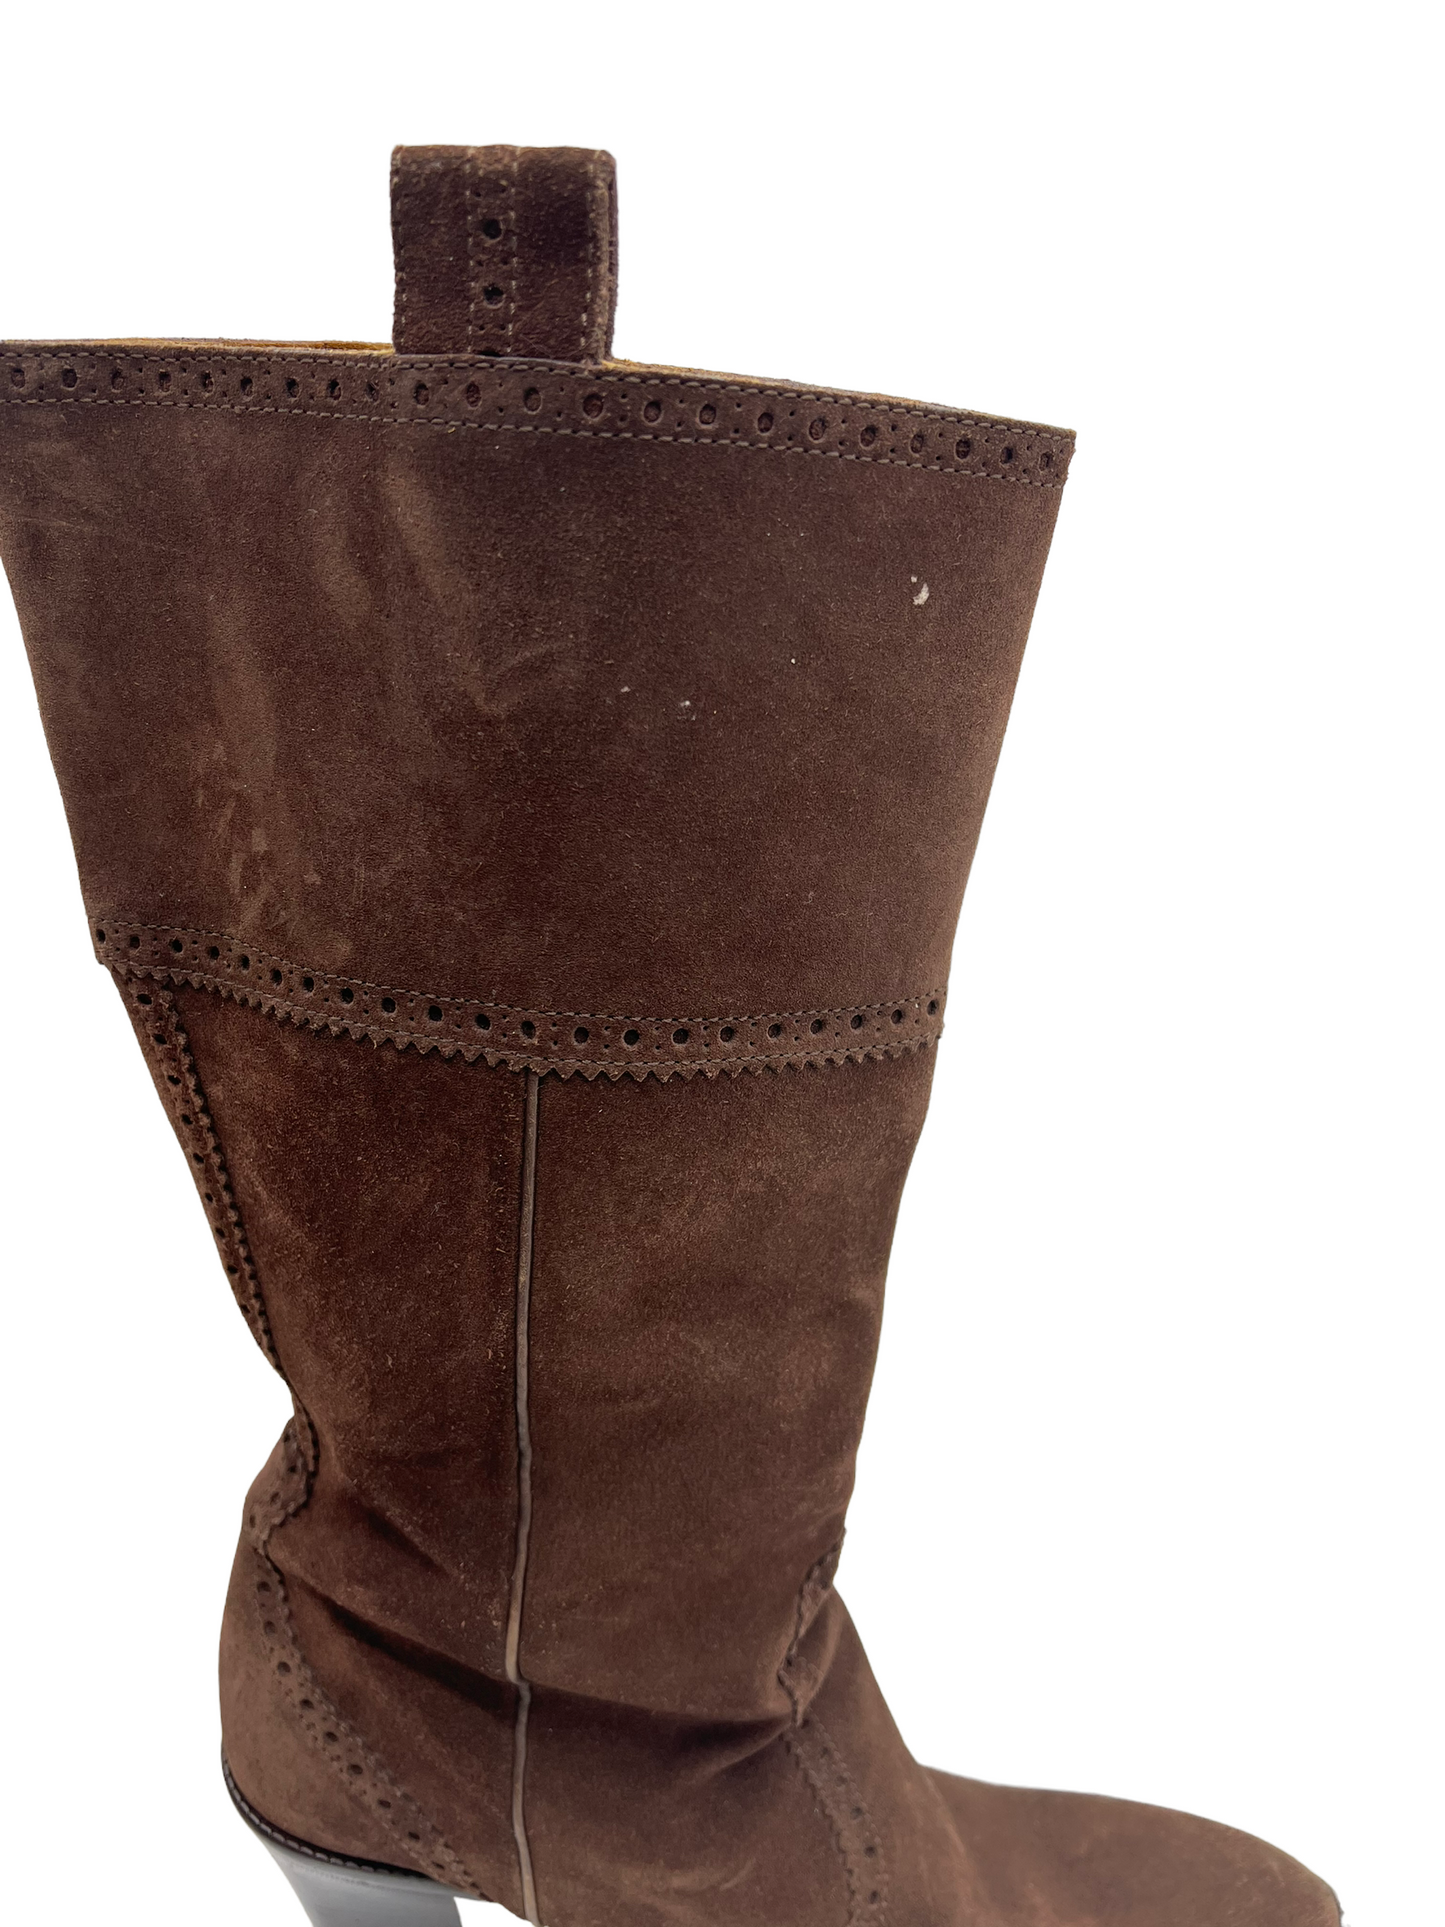 Gucci Brown Suede Size 8.5B Calf Boots